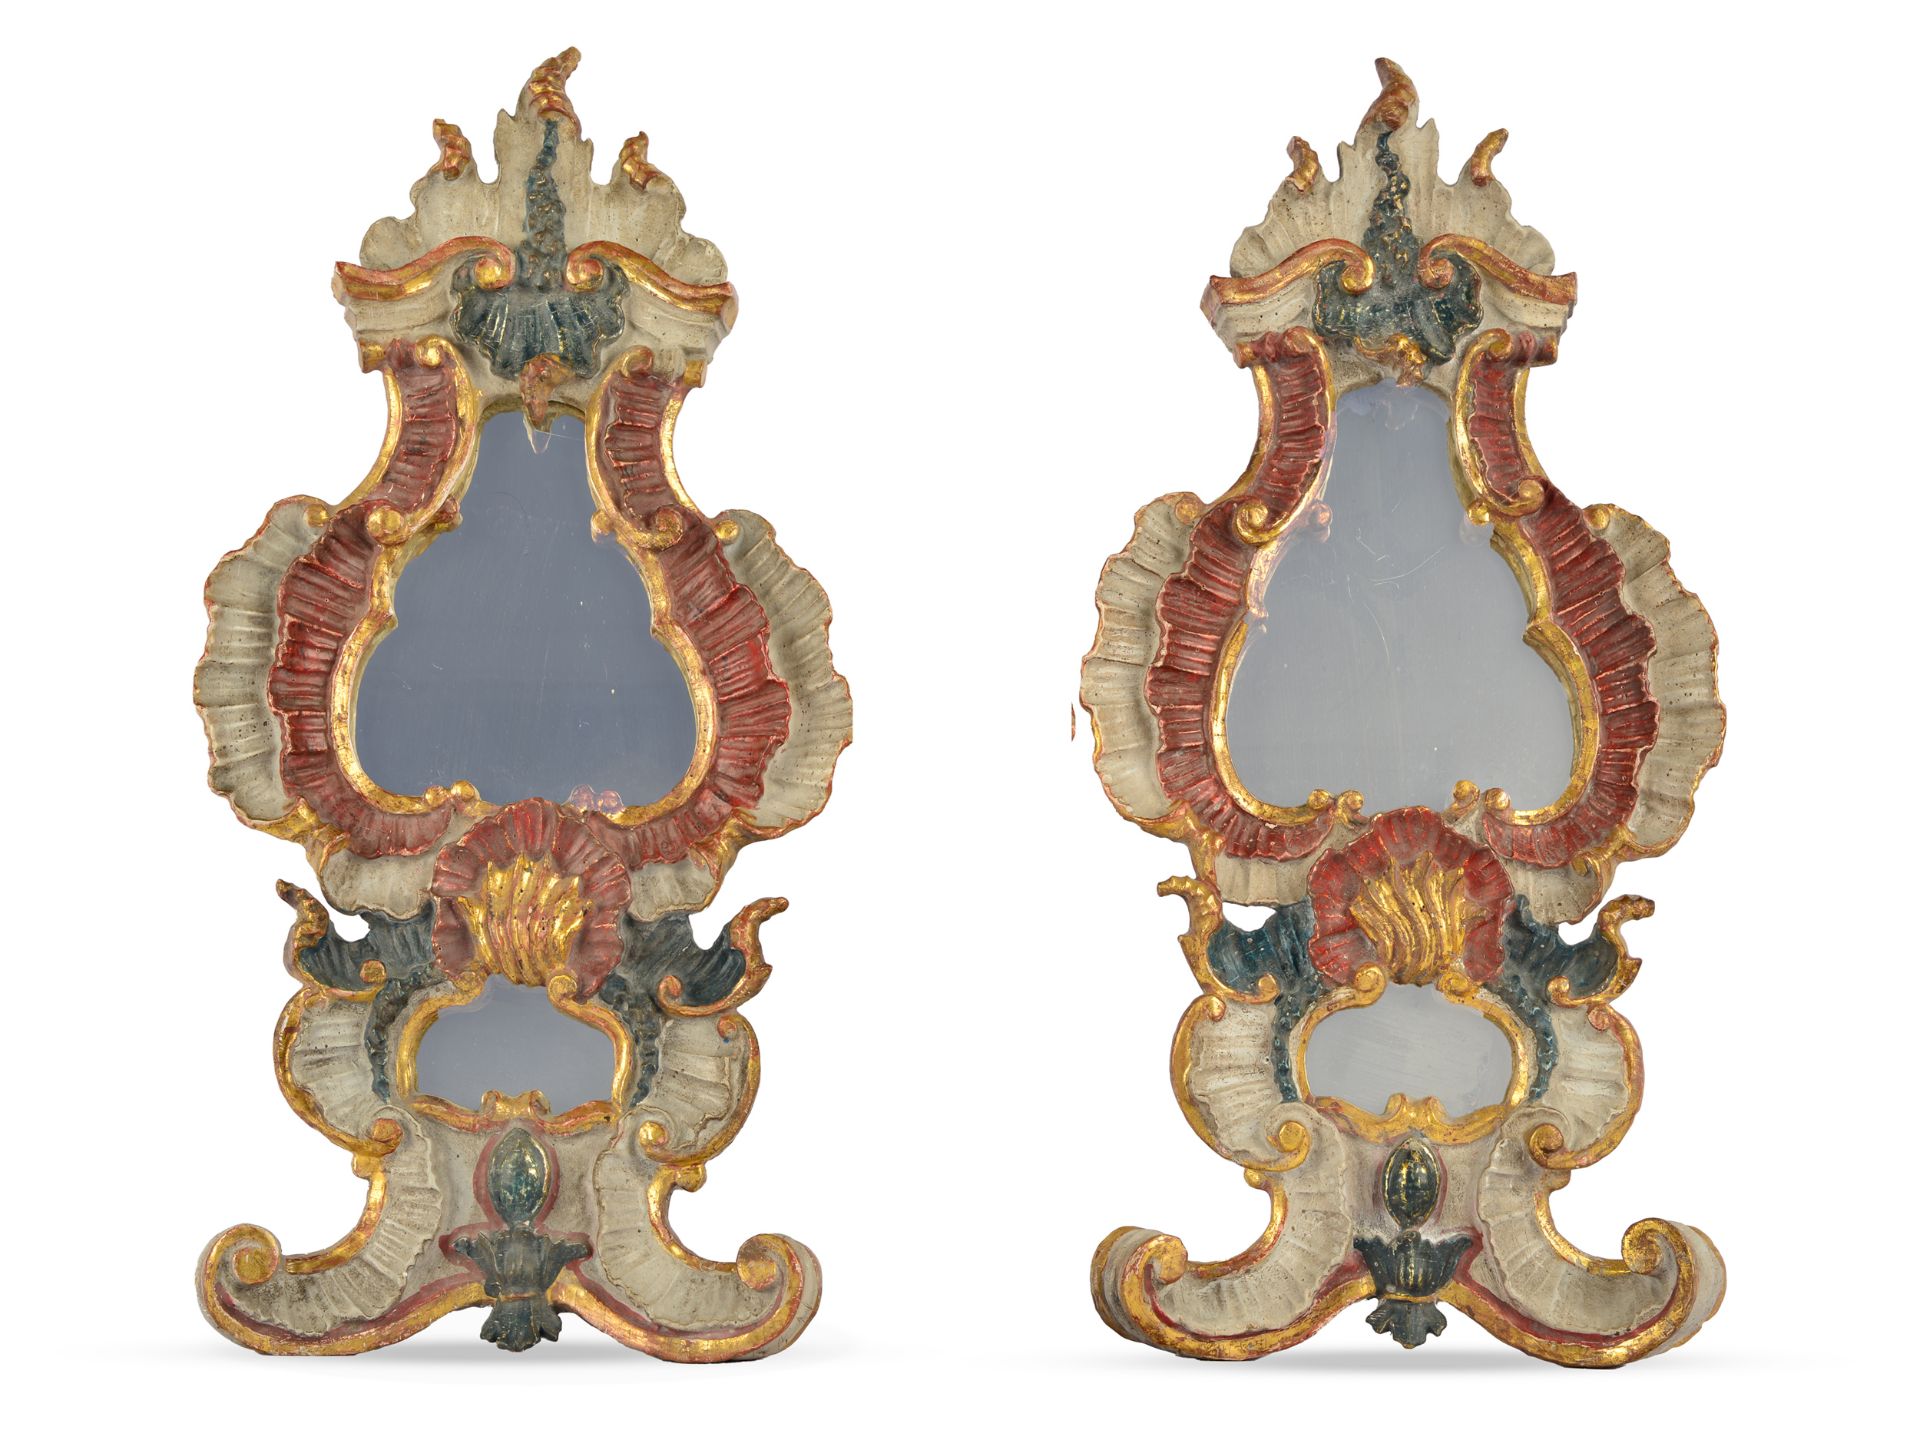 Pair of Baroque Mirrors, South German, Mid-18th century